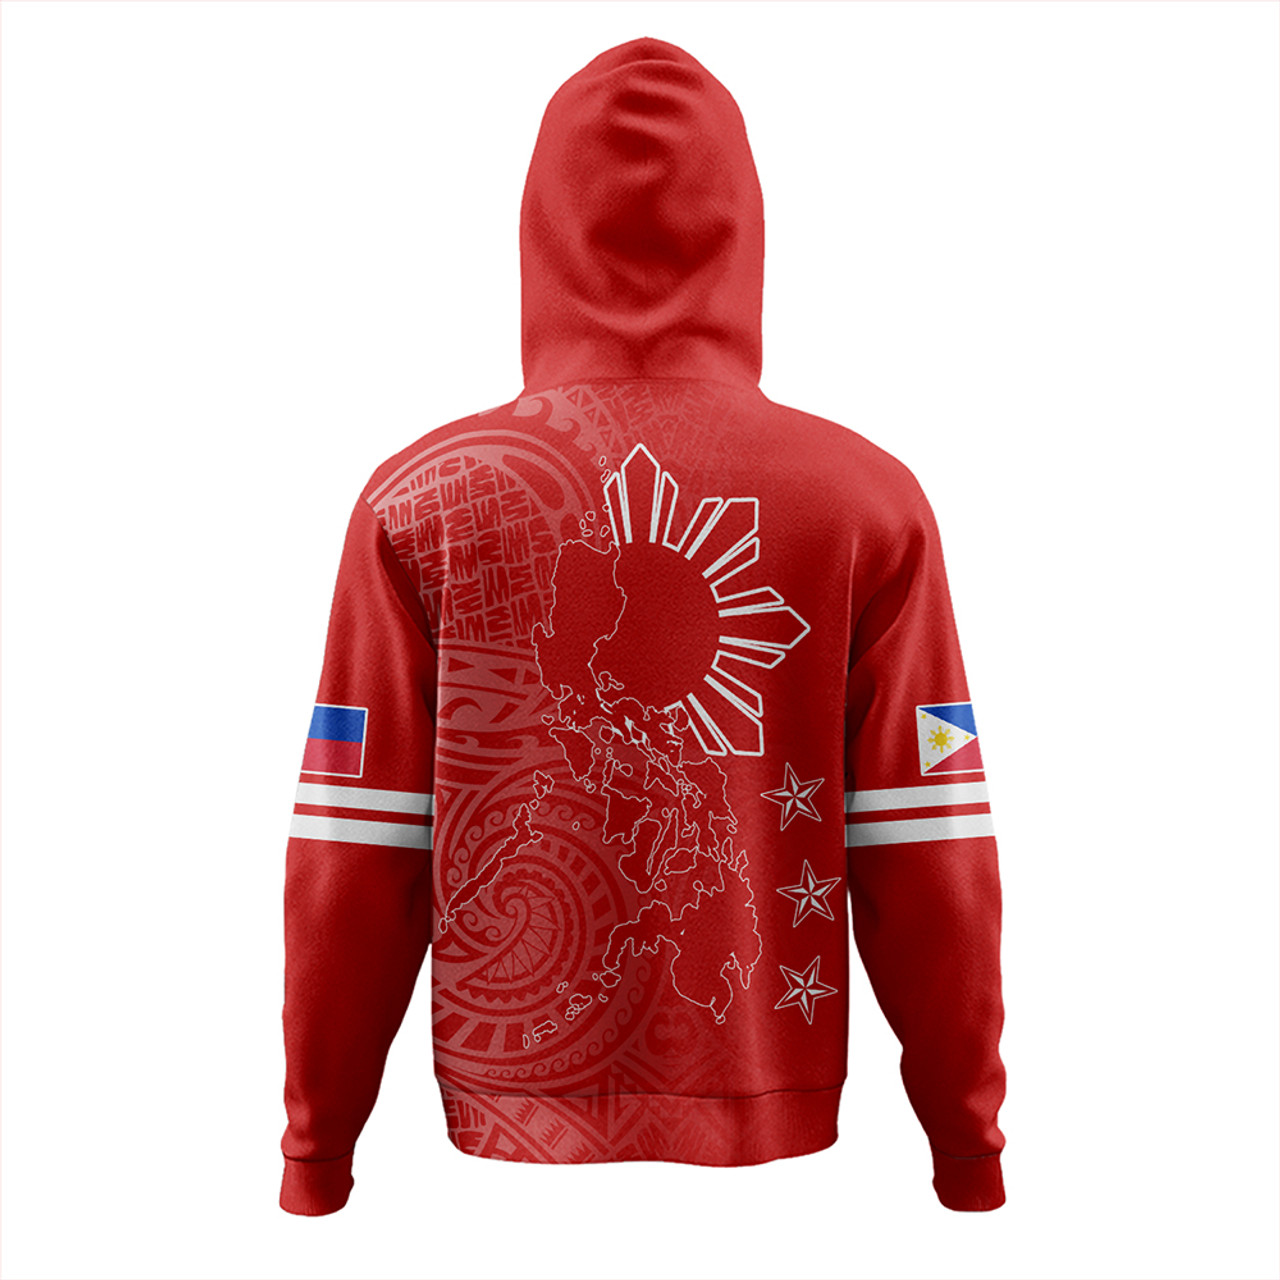 Philippines Hoodie Lauhala Half Concept Red